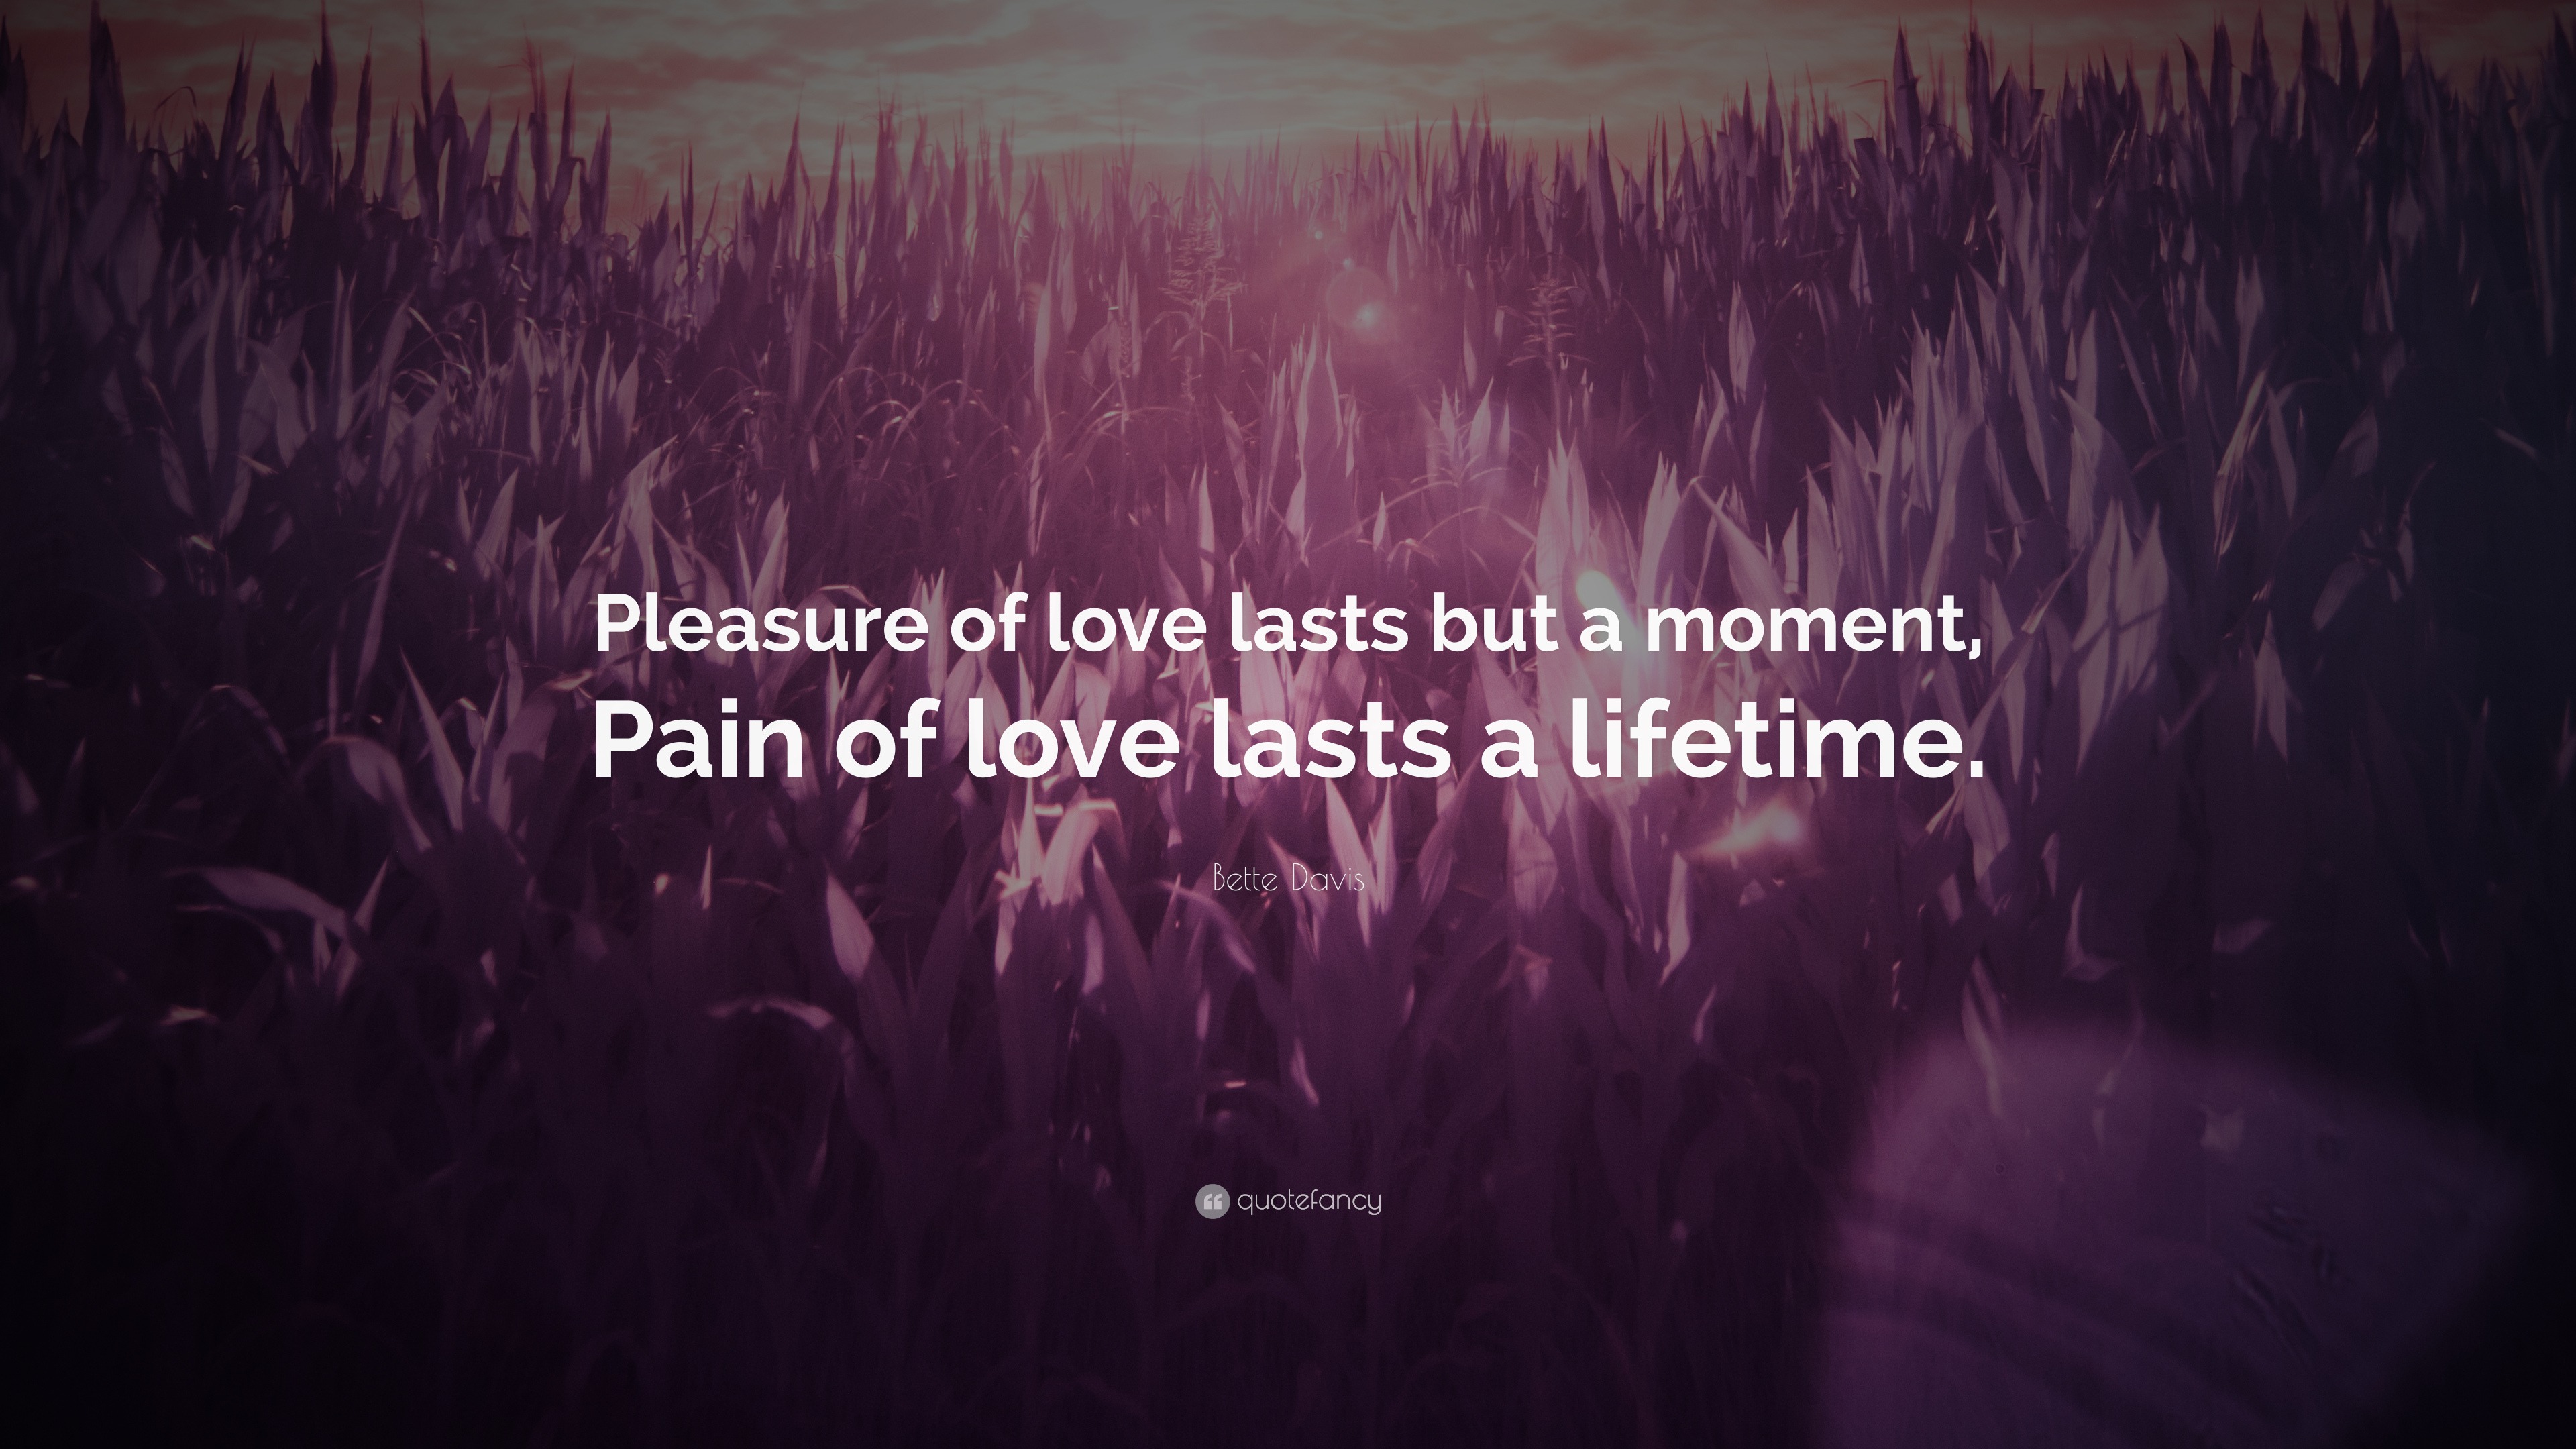 Pleasure of love lasts but a moment, Pain of love lasts a lifetime. 